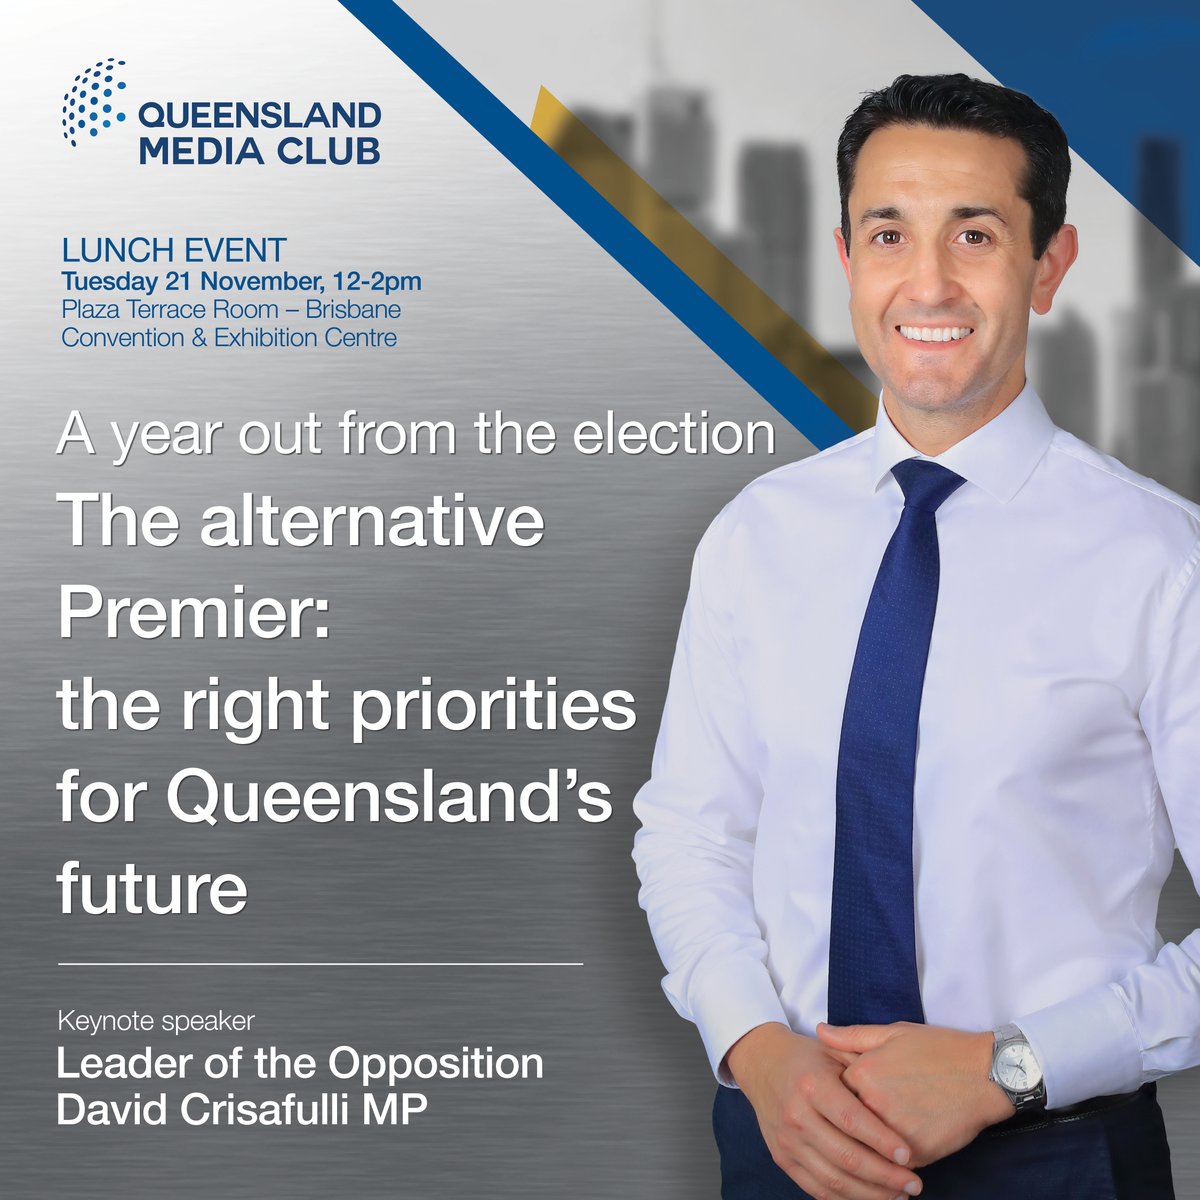 @QldMediaClub is pleased to announce @DavidCrisafulli will be addressing the Club on Tuesday 21 November – outlining what he believes are the right priorities for Queensland’s future. Secure your tickets today: loom.ly/nWVulgM #QueenslandGovernment #Elections #ThreePlus